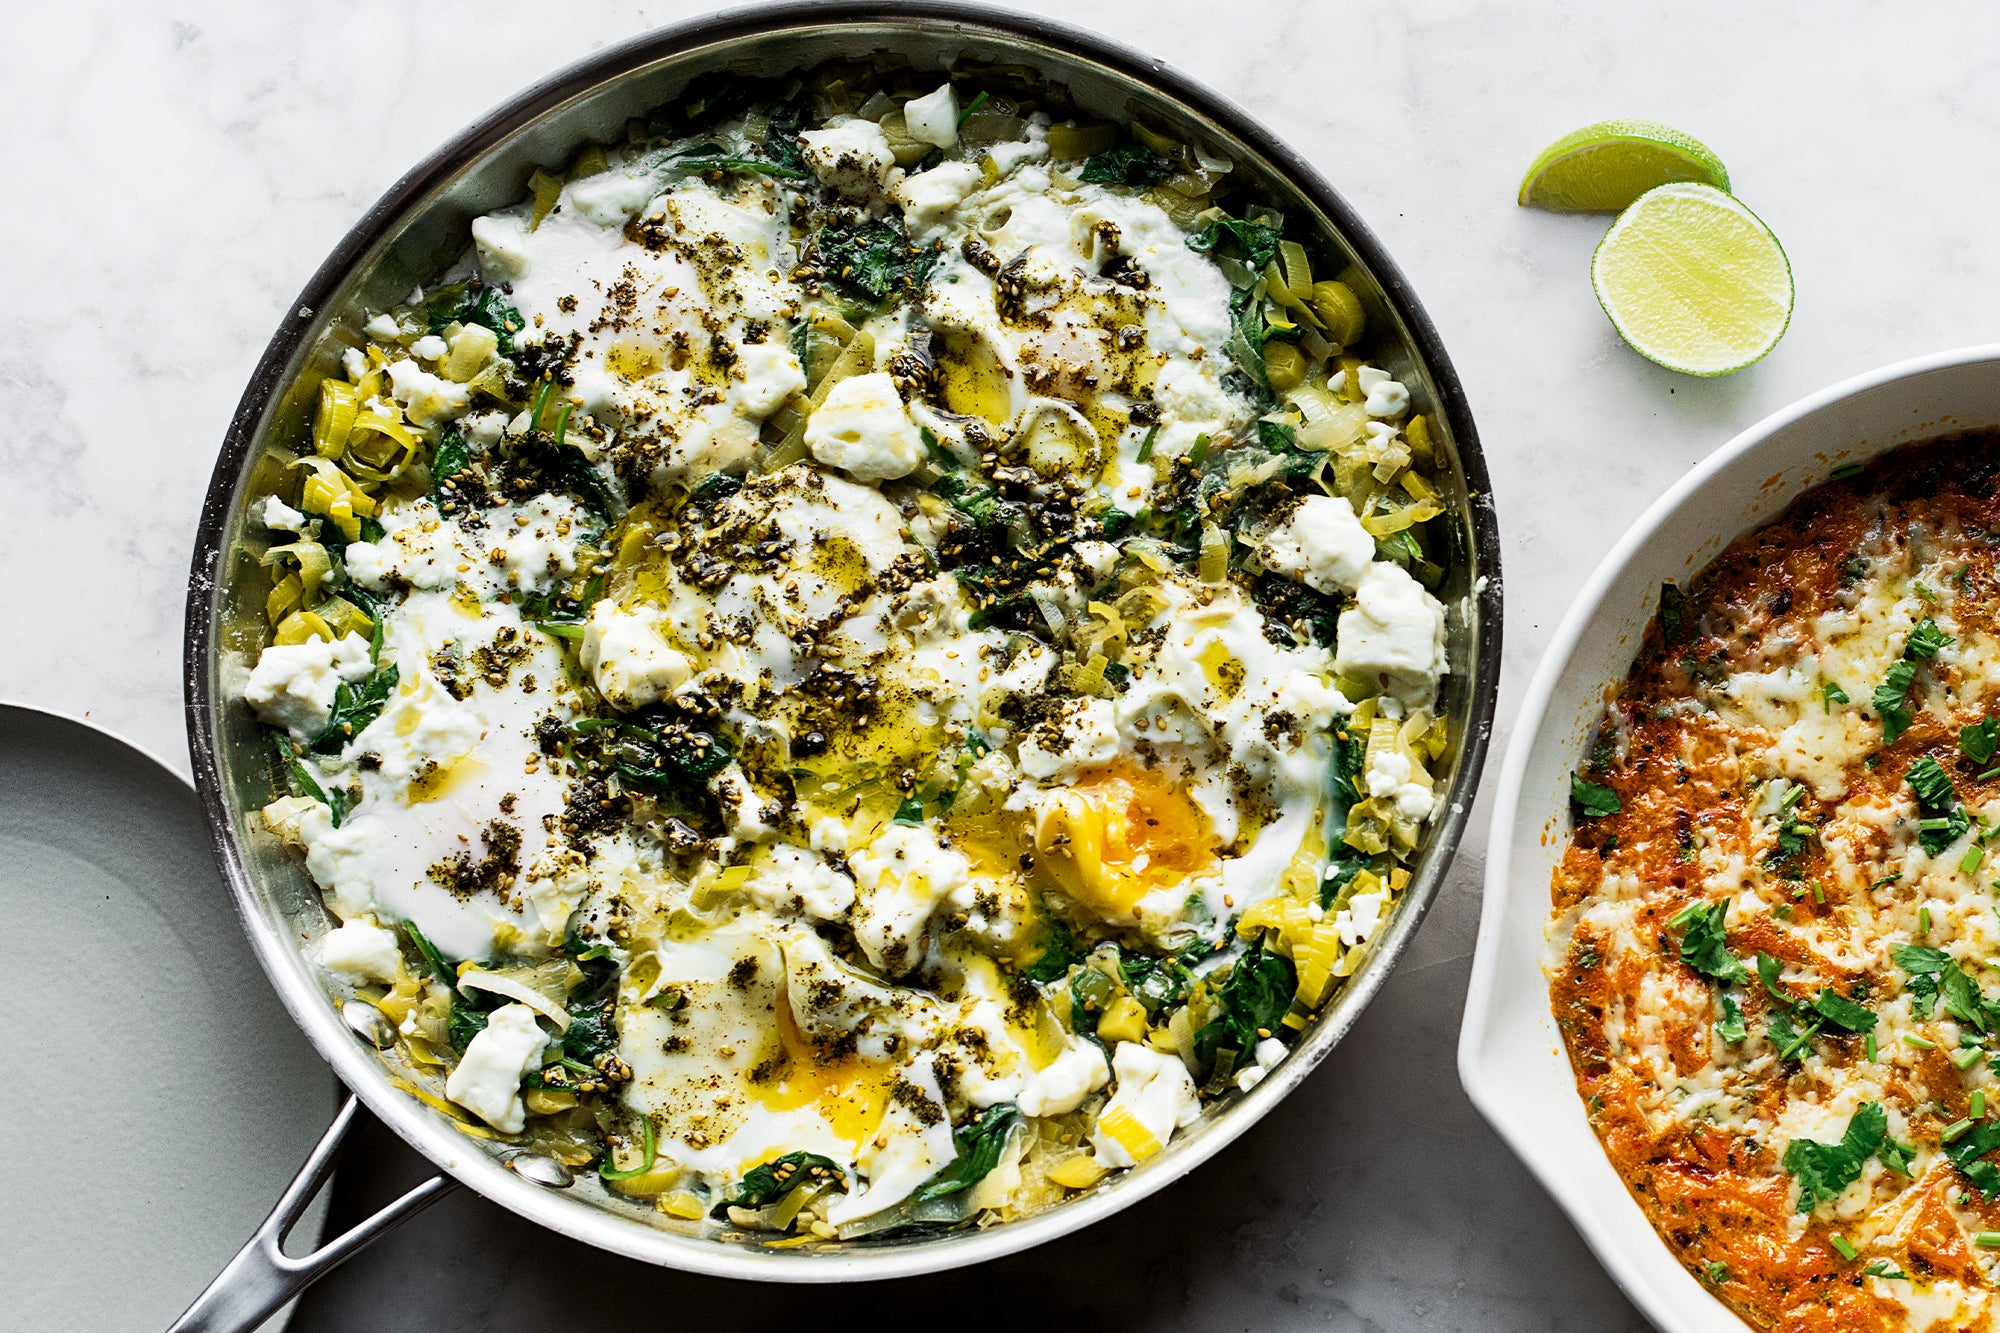 Braised eggs with leek and za’atar